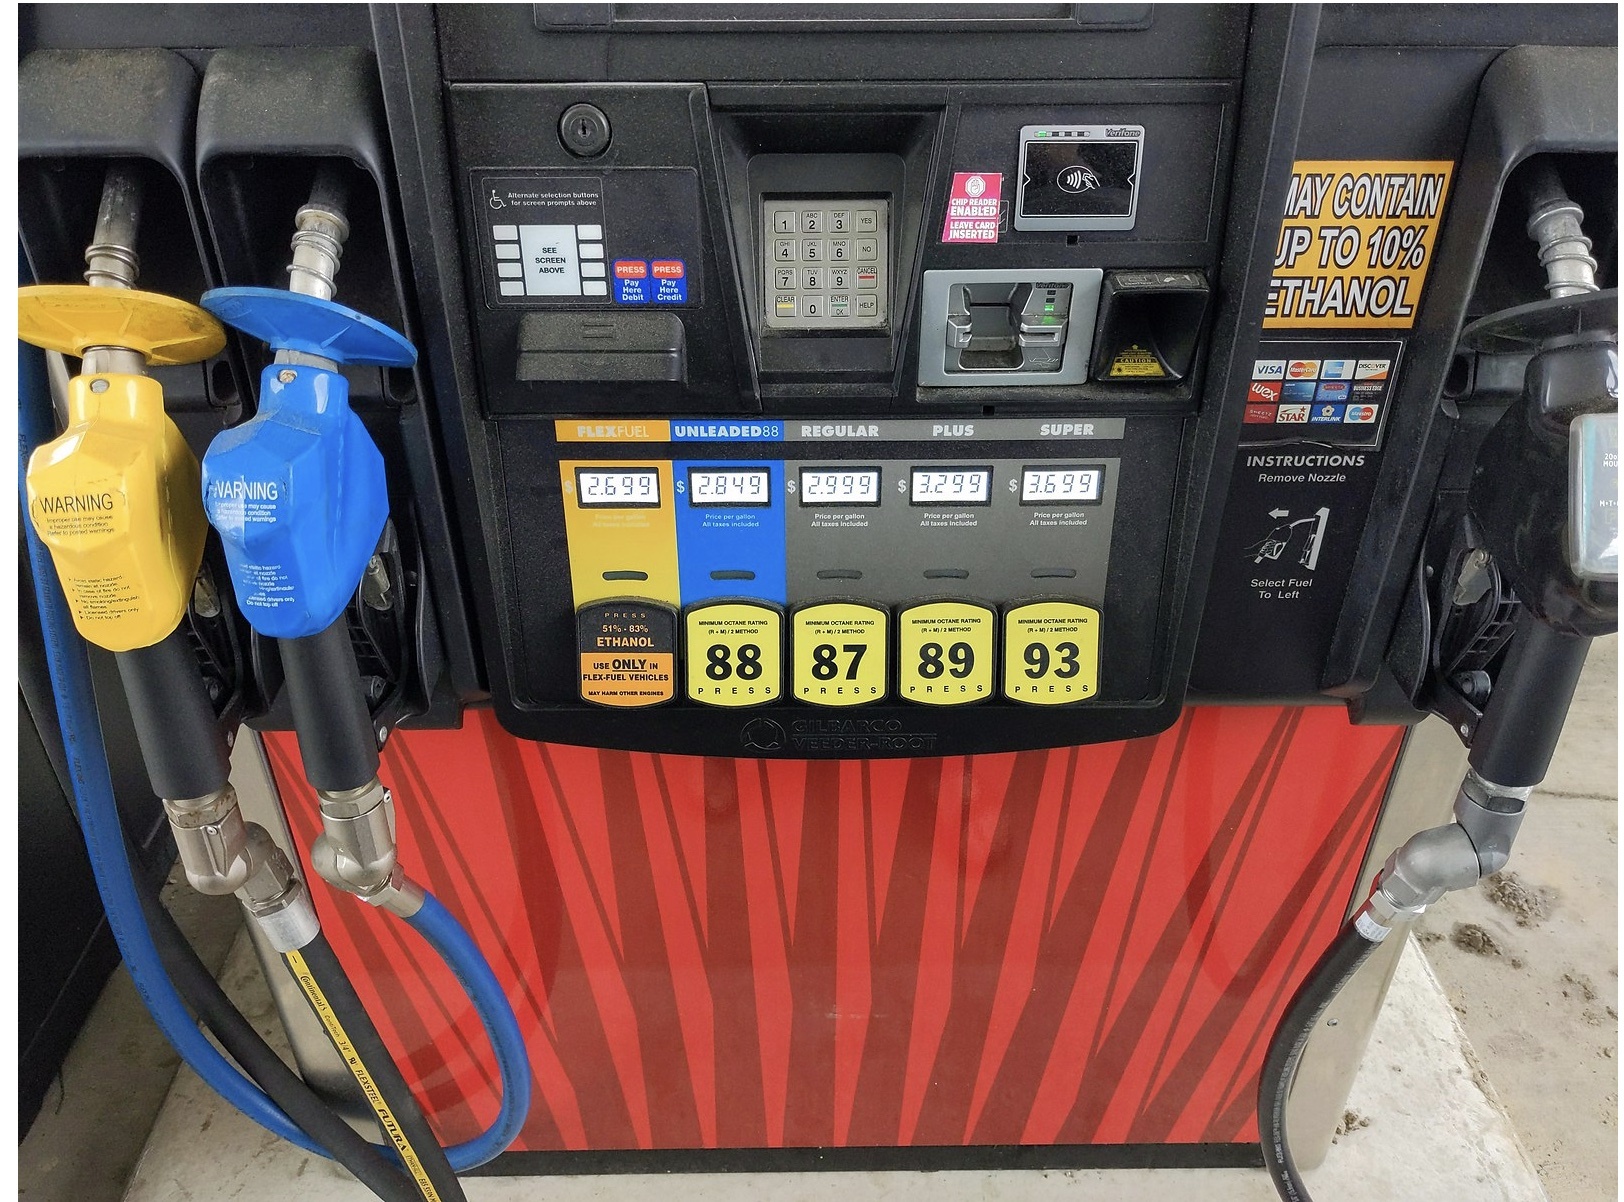 nc-gas-tax-increases-slightly-as-the-new-year-begins